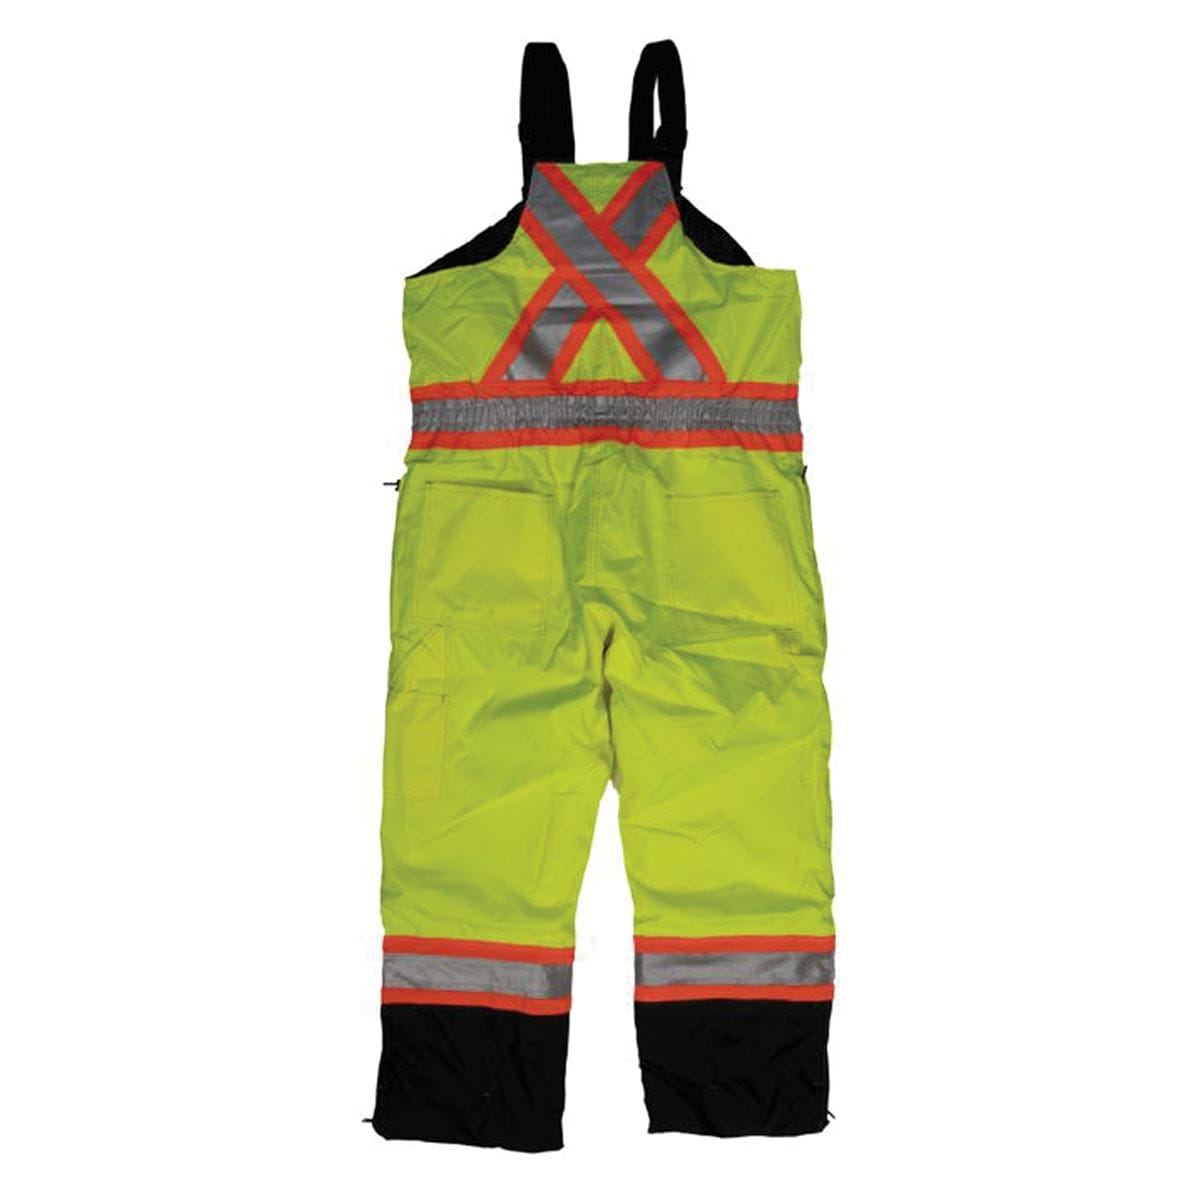 Tough Duck Enhanced Visibility Insulated Ripstop Safety Overall